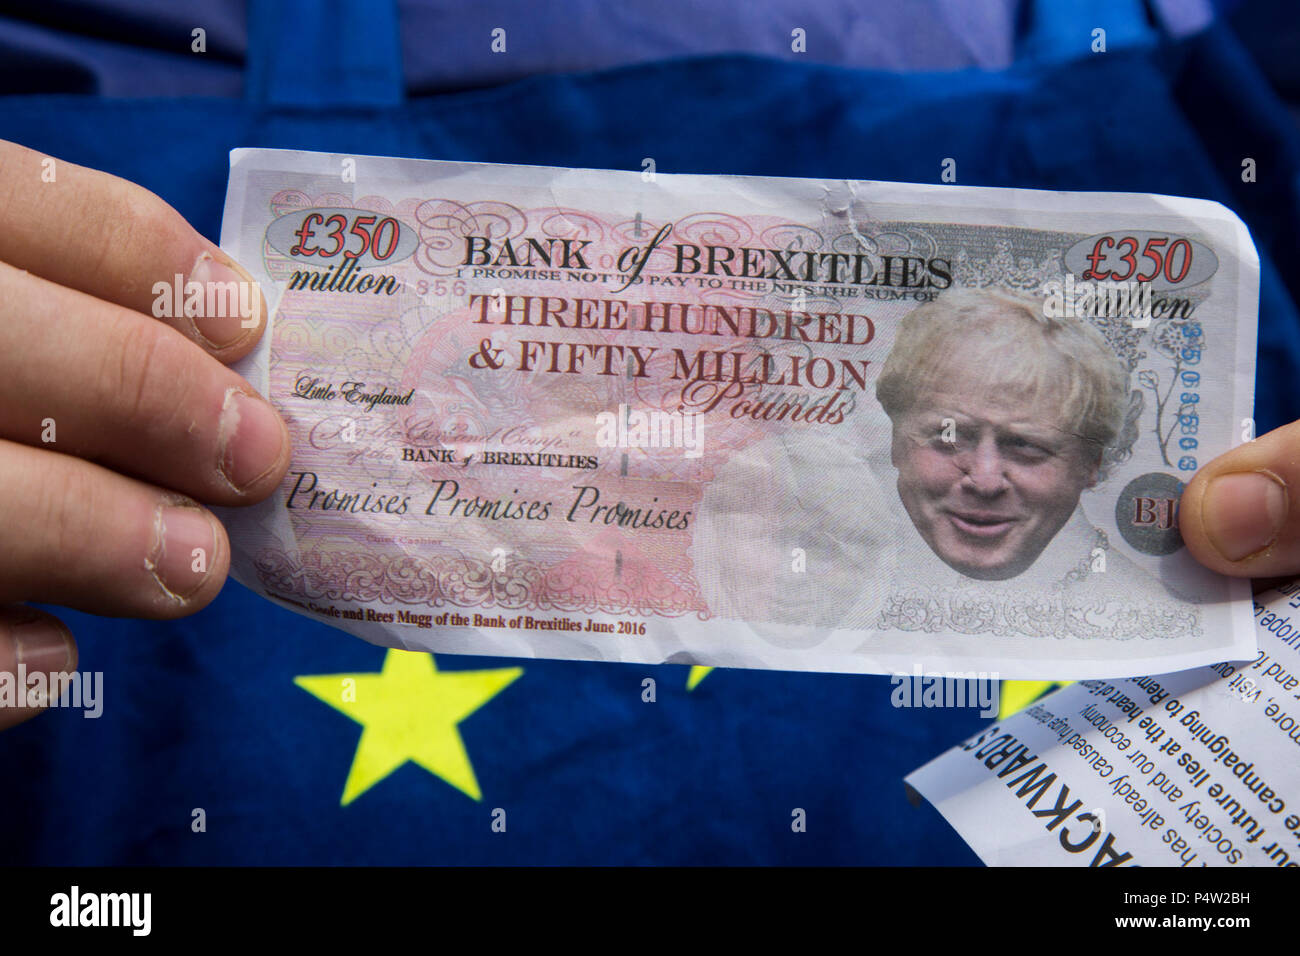 London, UK. 23 June 2018.Anti-Brexit march and rally for a People's Vote in Central London. Face of Boris Johnson on a 350 million pound note. Stock Photo